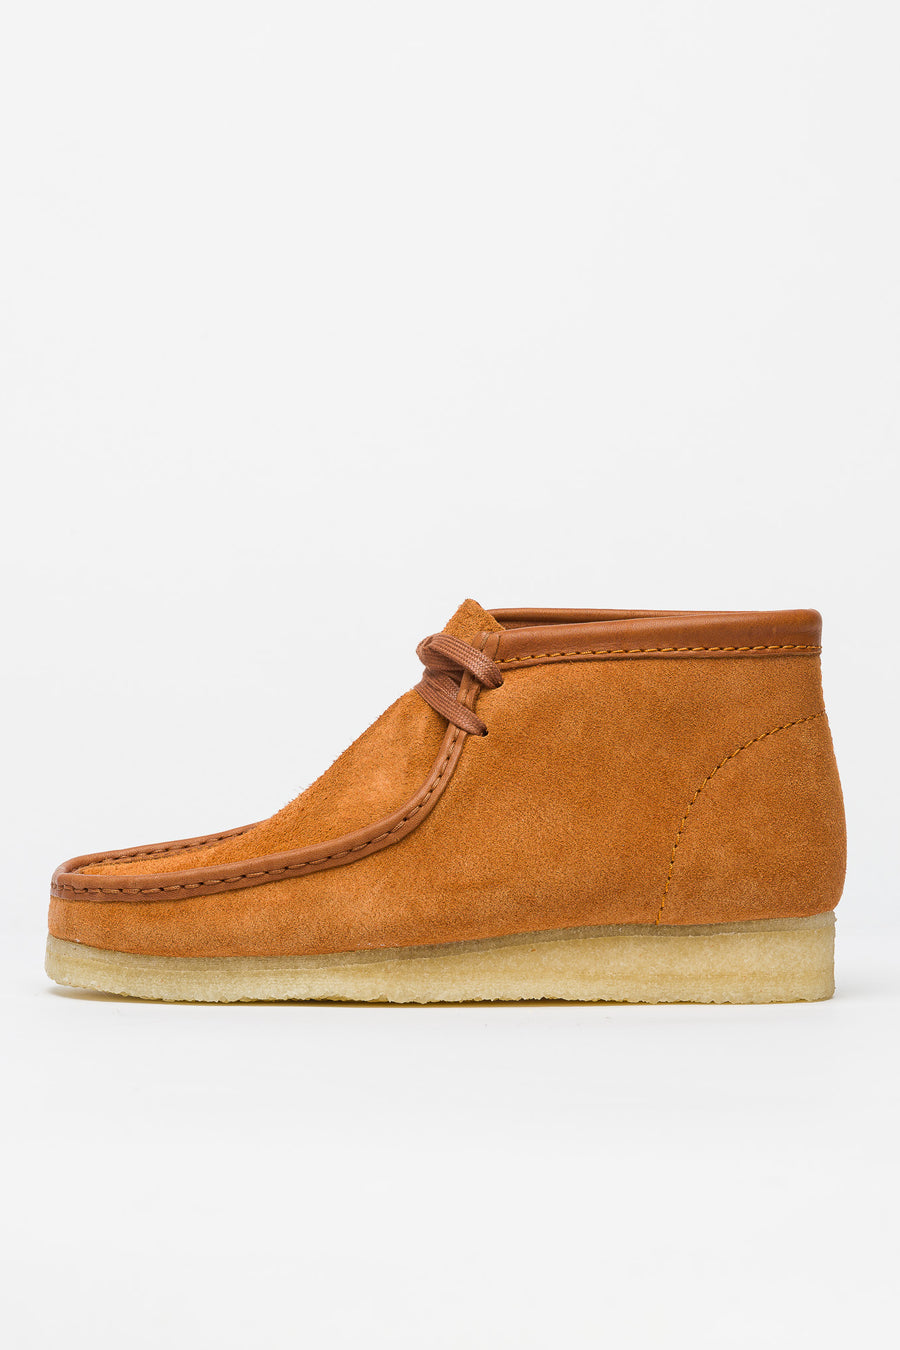 Wallabee Boot in Tan Hairy Suede